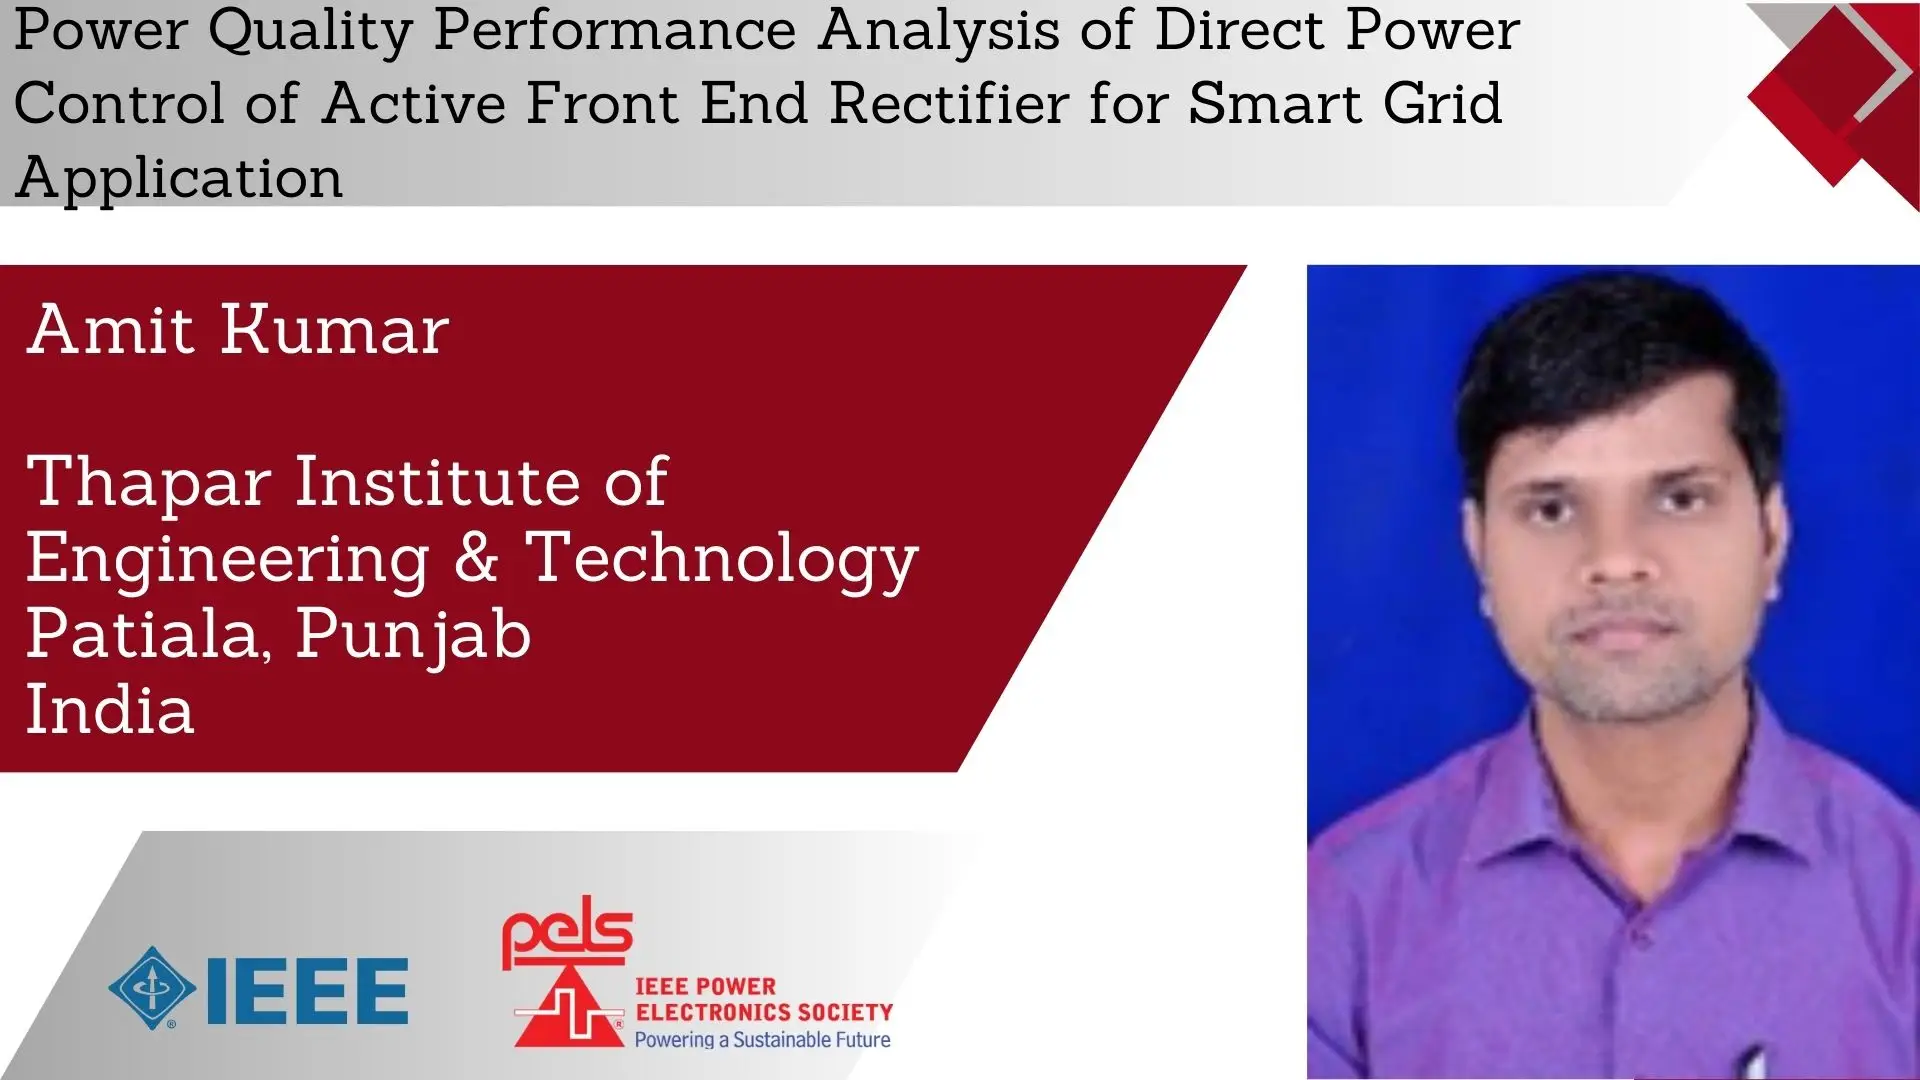 Power Quality Performance Analysis of Direct Power Control of Active Front End Rectifier for Smart Grid Application -Slides